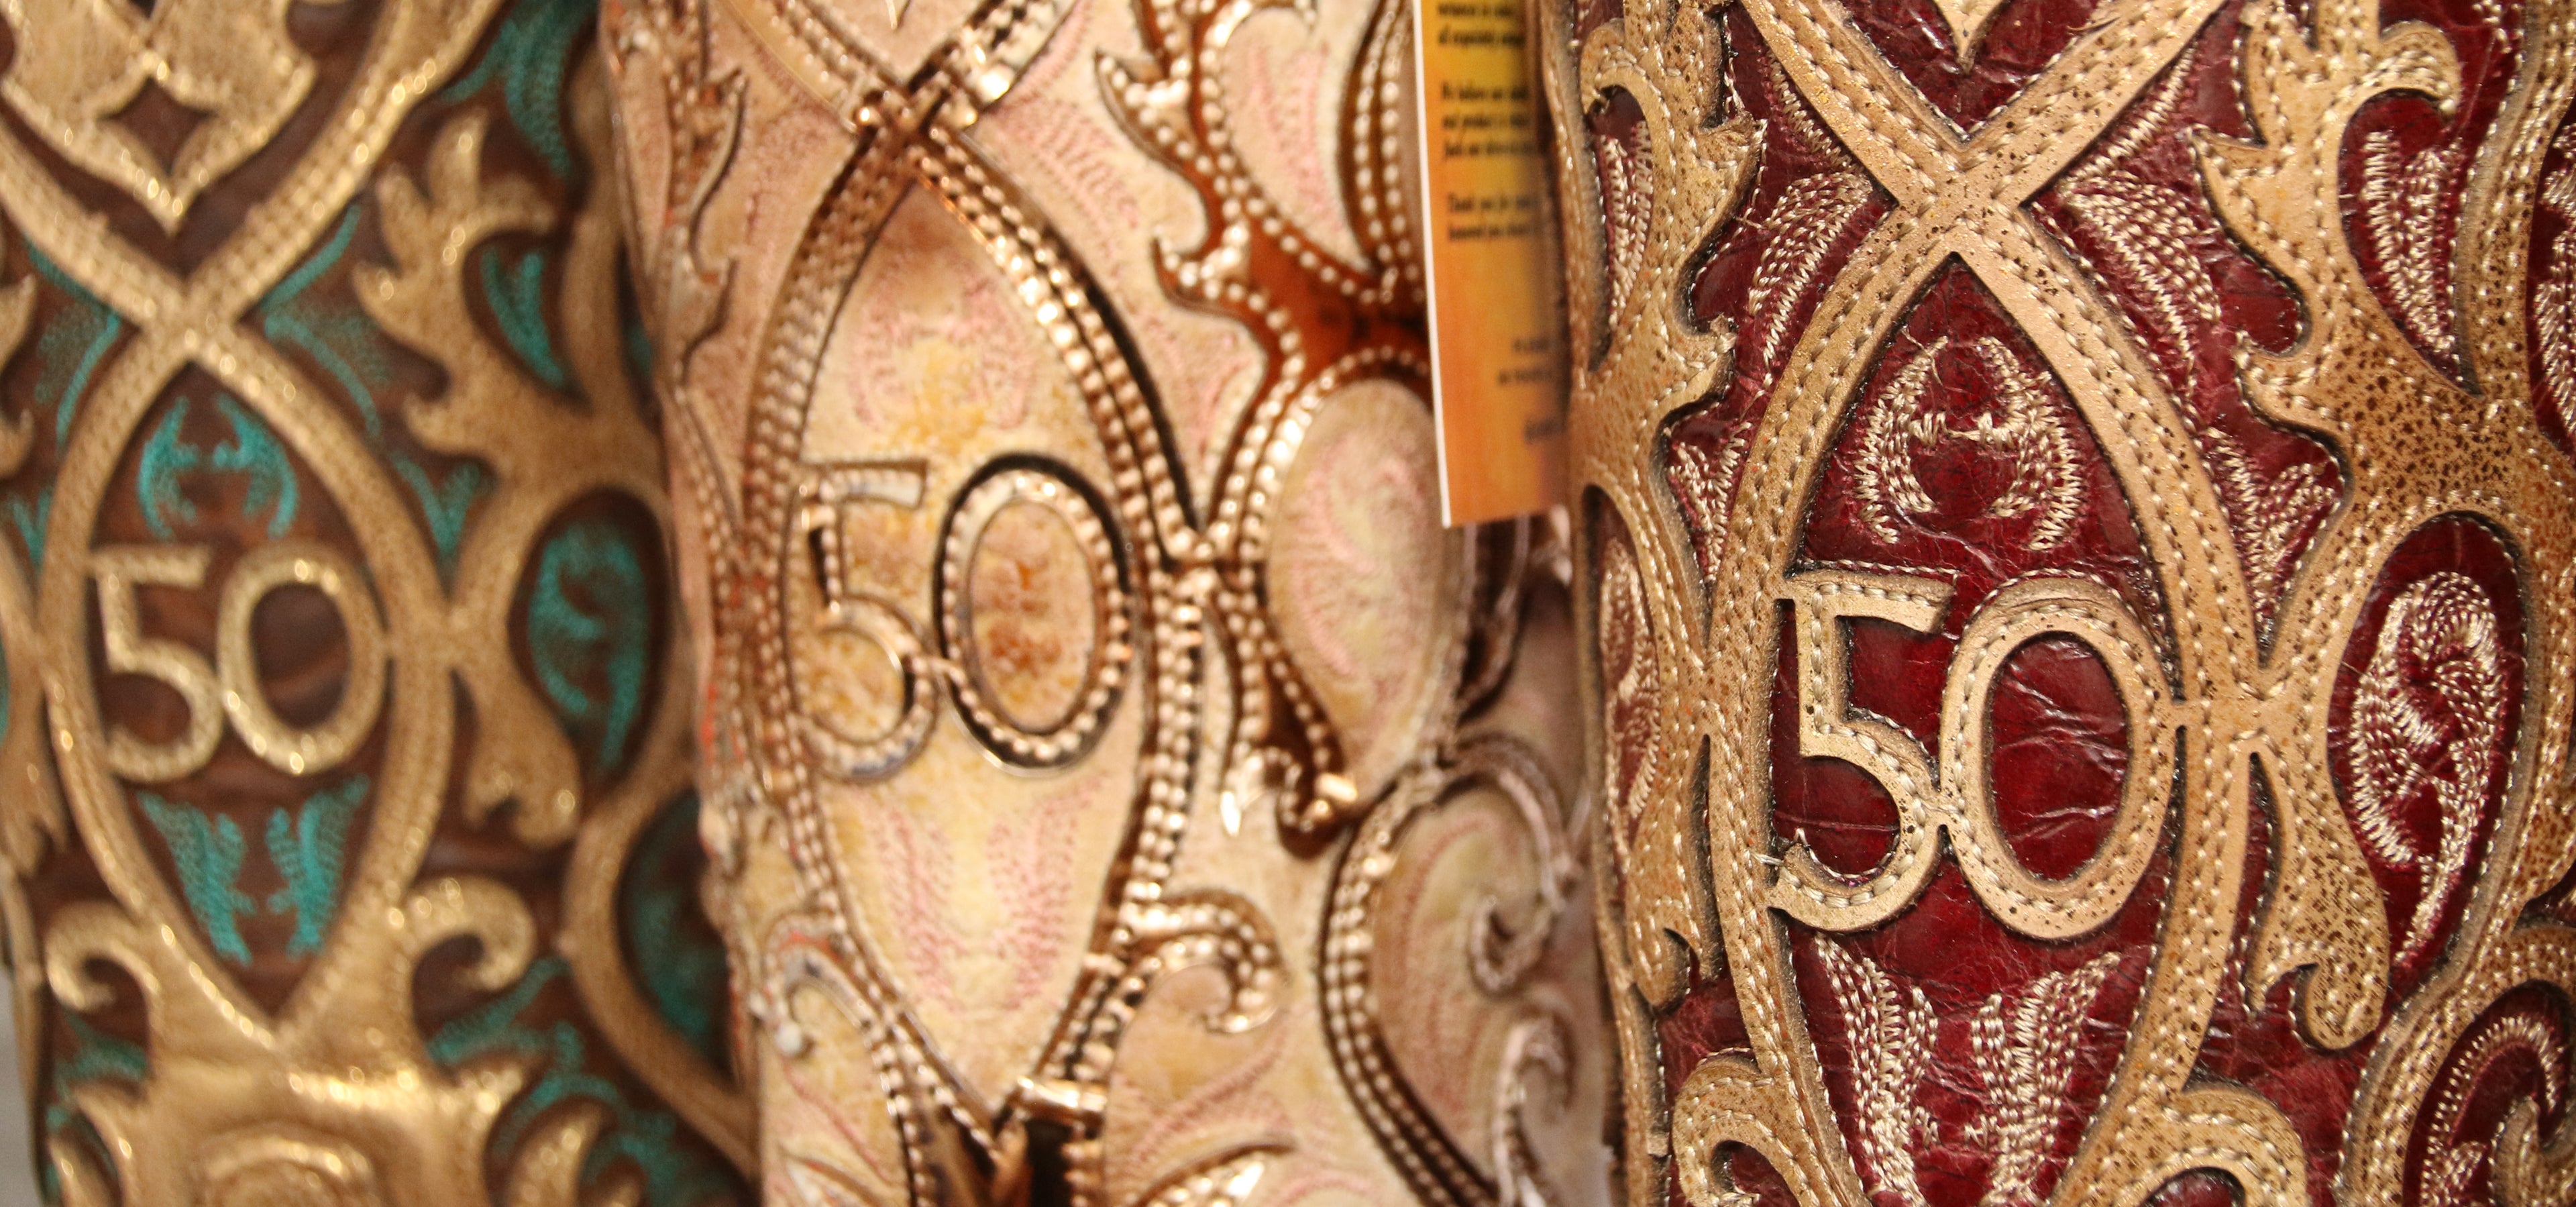 Close-up image of 3 pairs of custom-designed 50th anniversary French's boots designed by Corral Boots